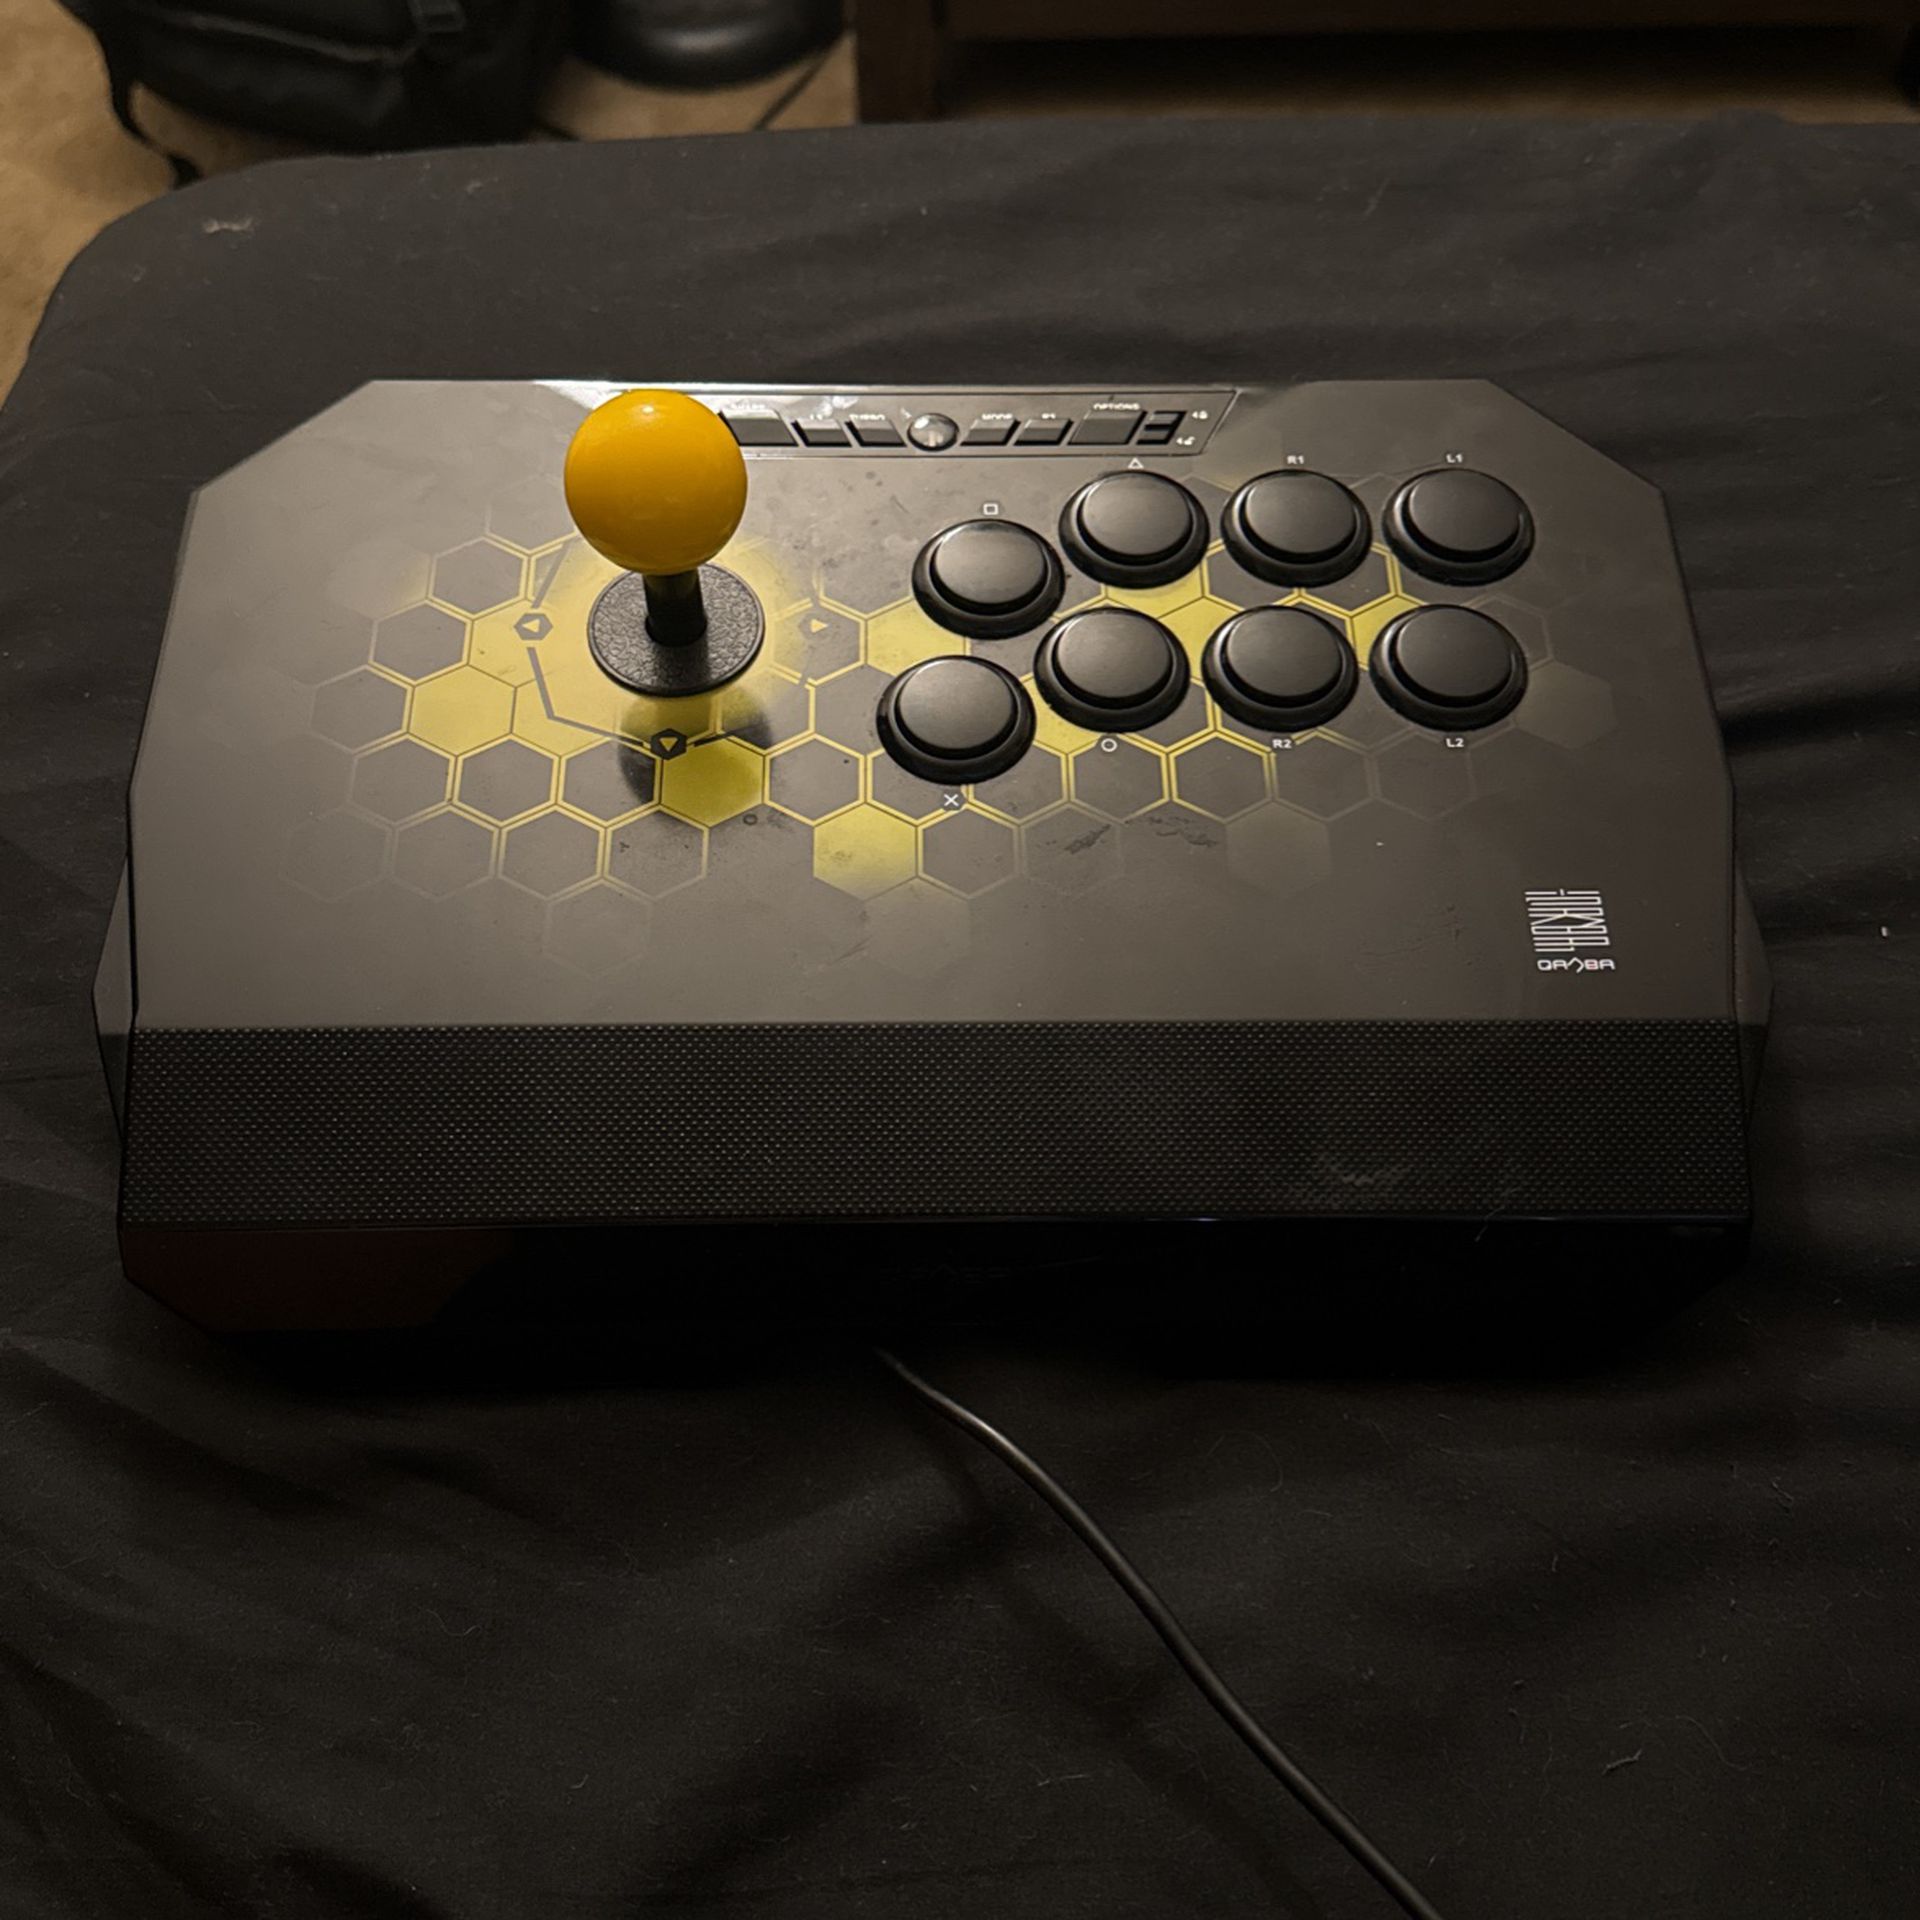 Qanba Drone FightStick for PC/PS4